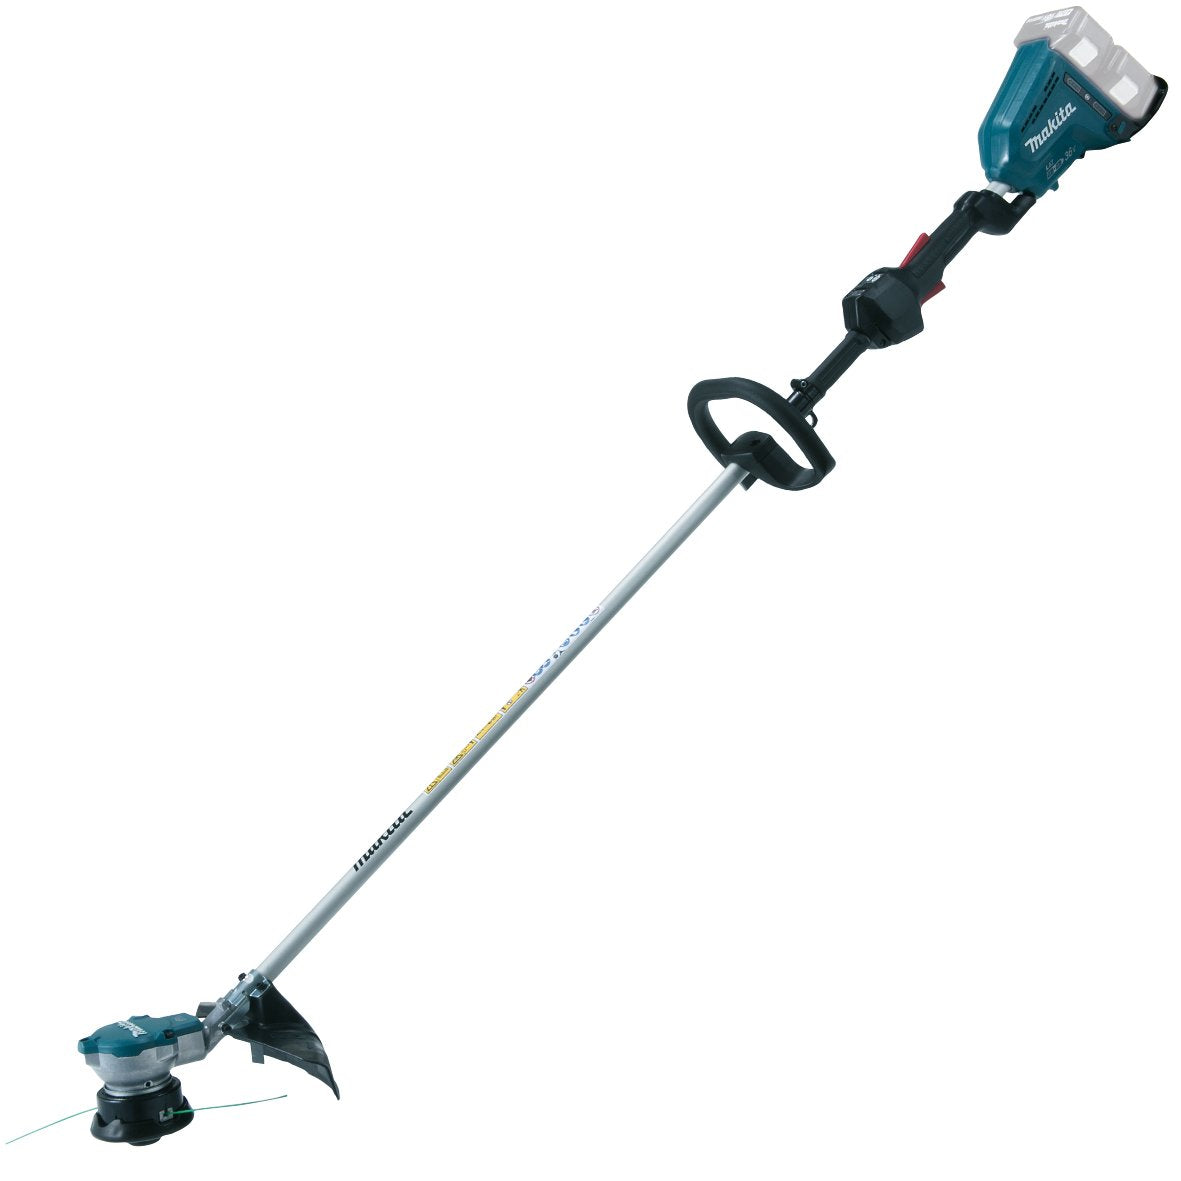 Makita DUR364LZ - Brushless 18Vx2 14" Cordless Line Trimmer - wise-line-tools